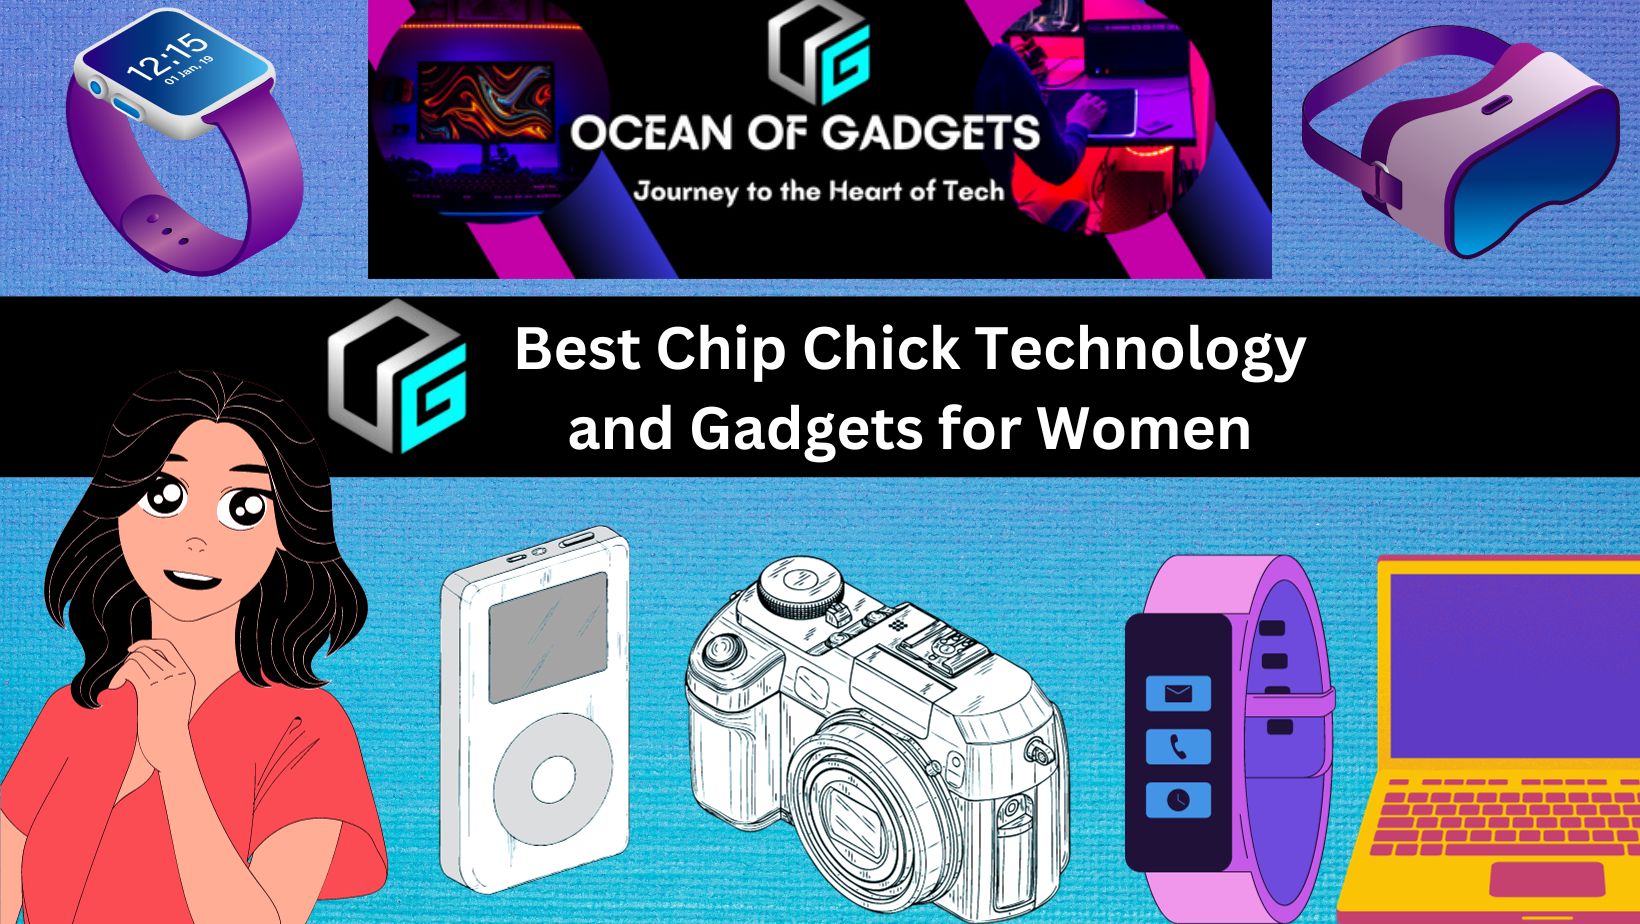 Best Chip Chick Technology and Gadgets for Women